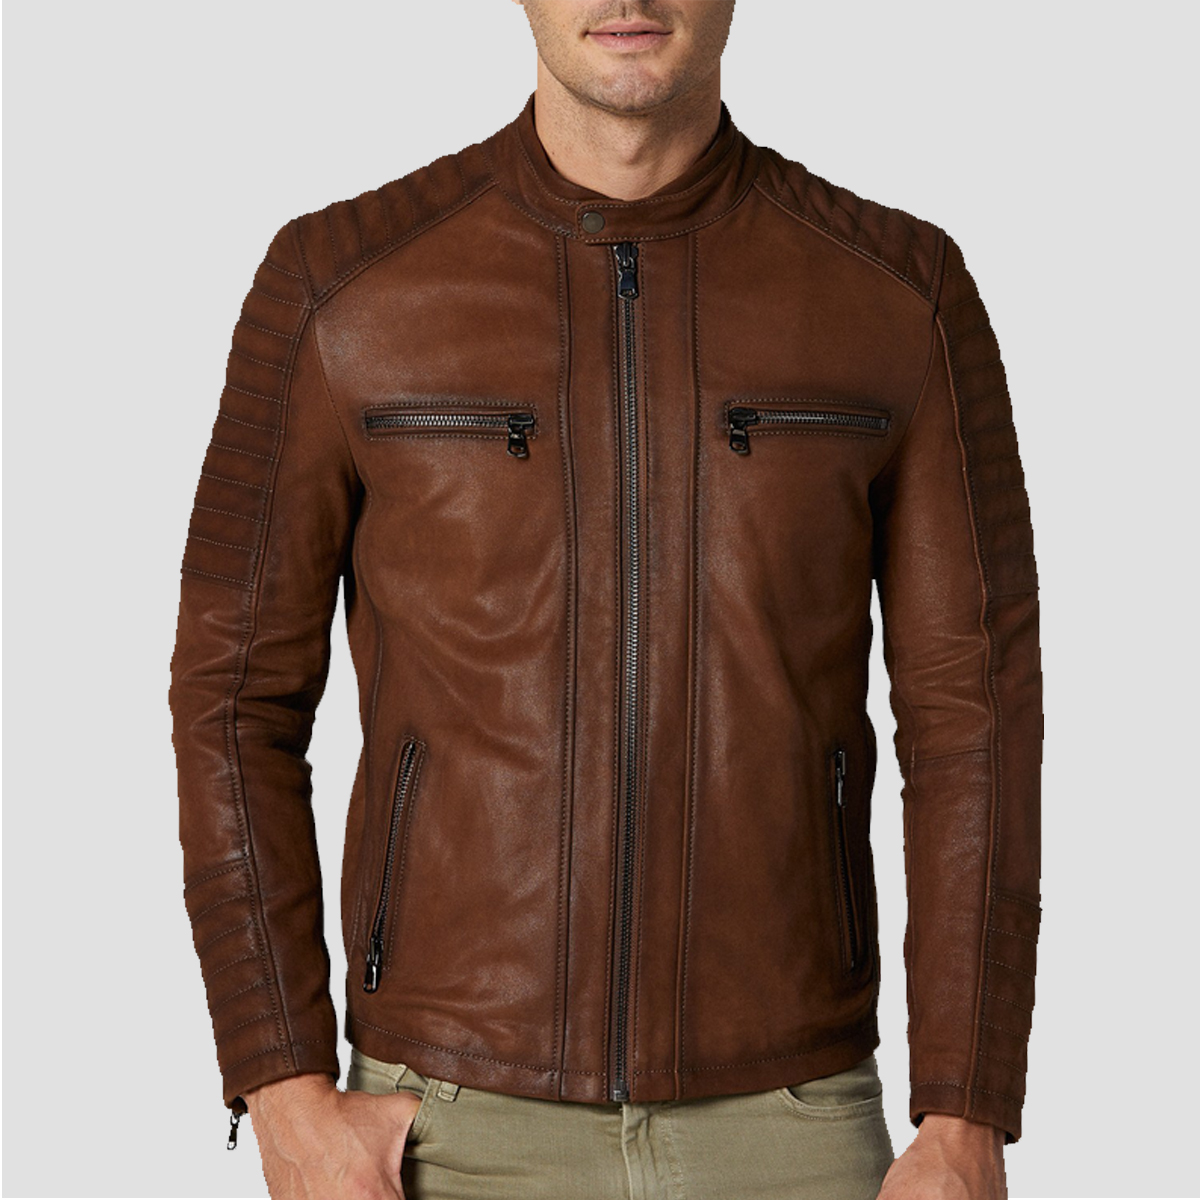 Motorcycle Waxed Dark Brown Leather Jacket - The Vintage Leather